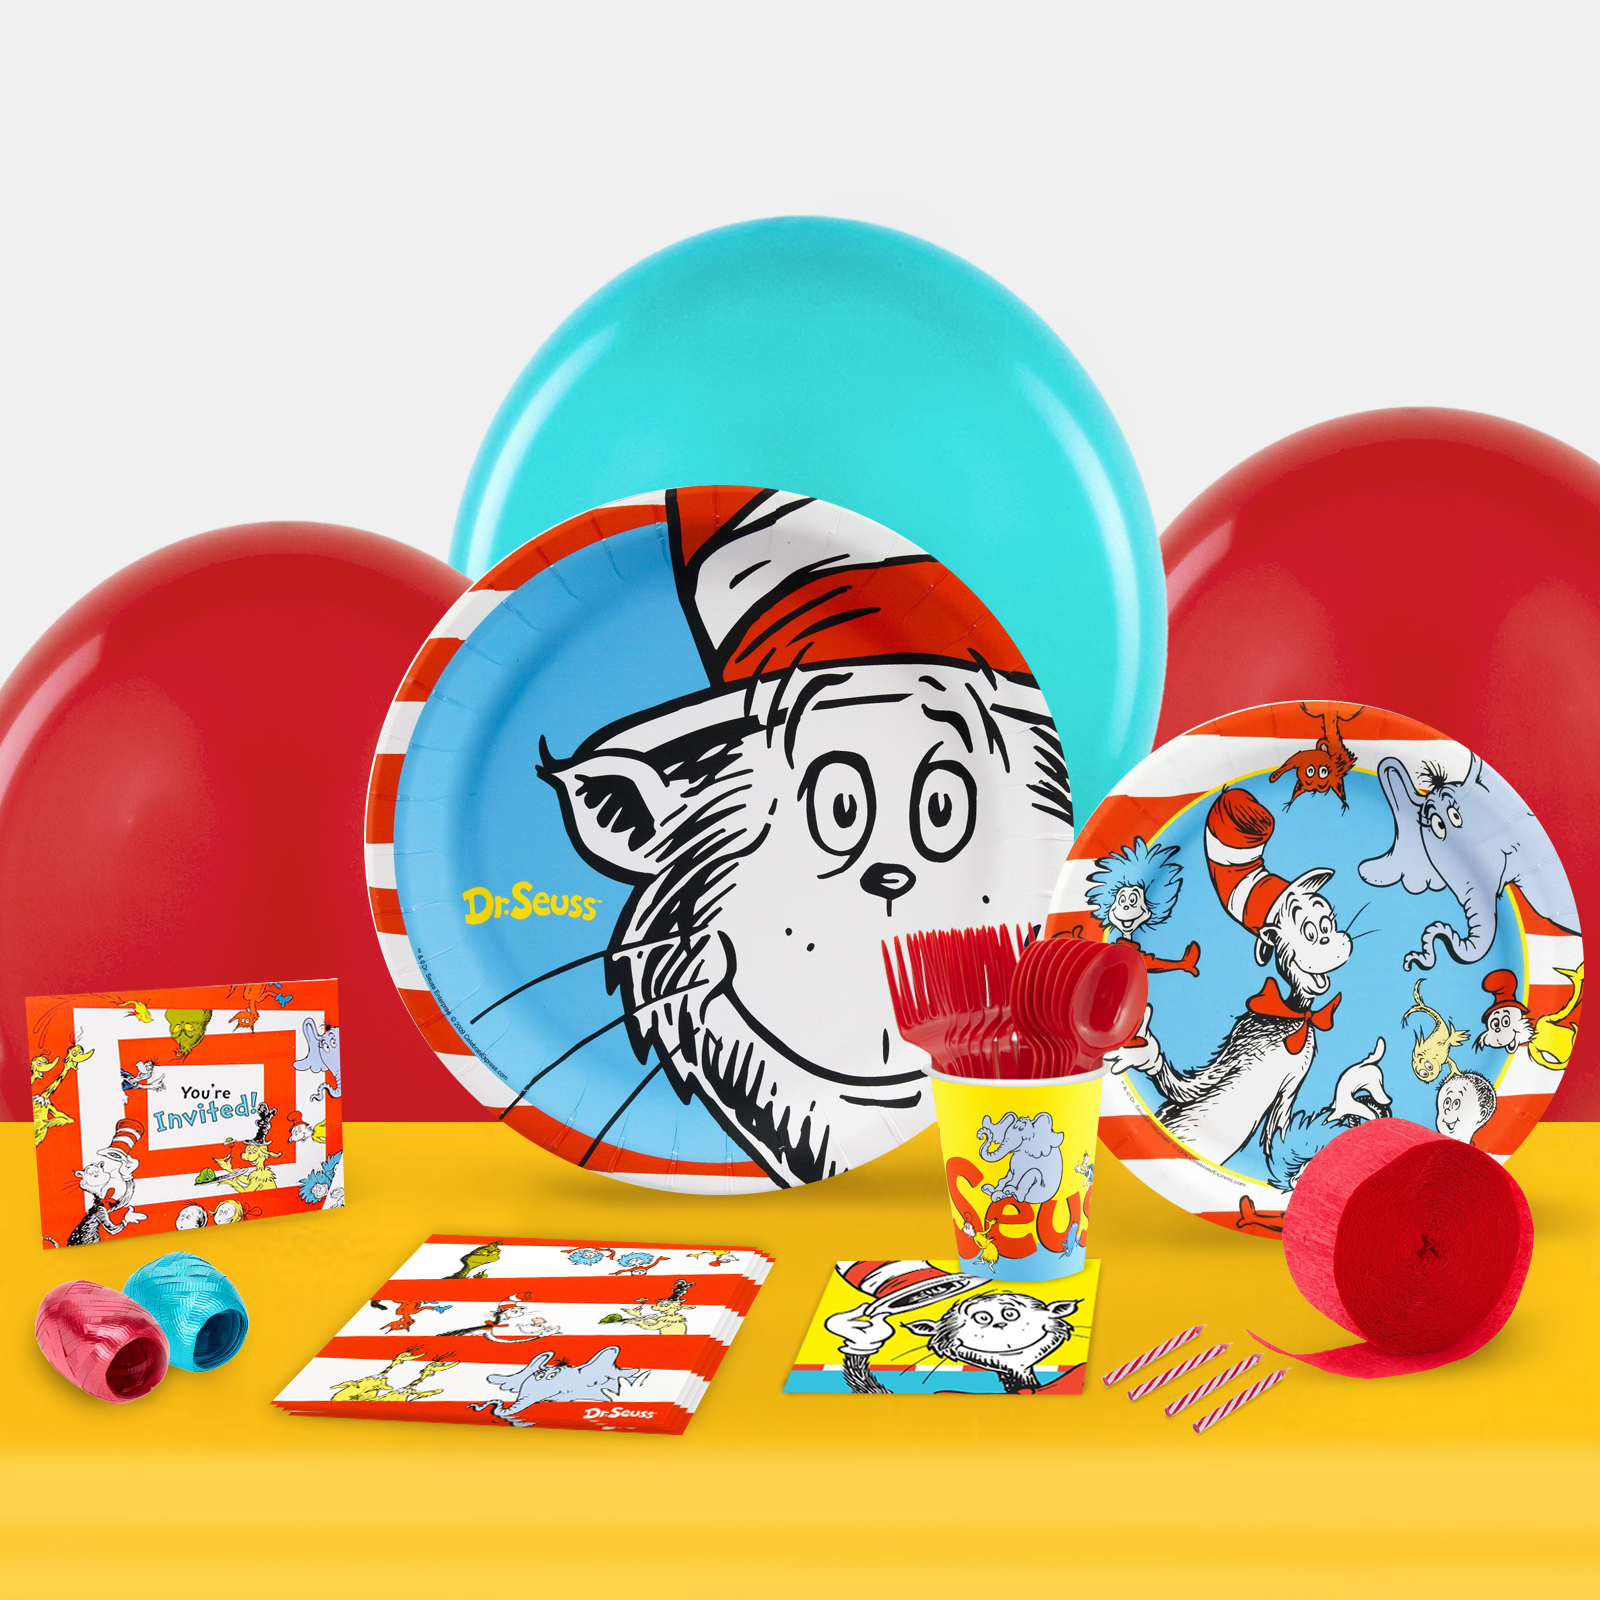 Dr. Seuss Party in a Box For 8 | BirthdayExpress.com